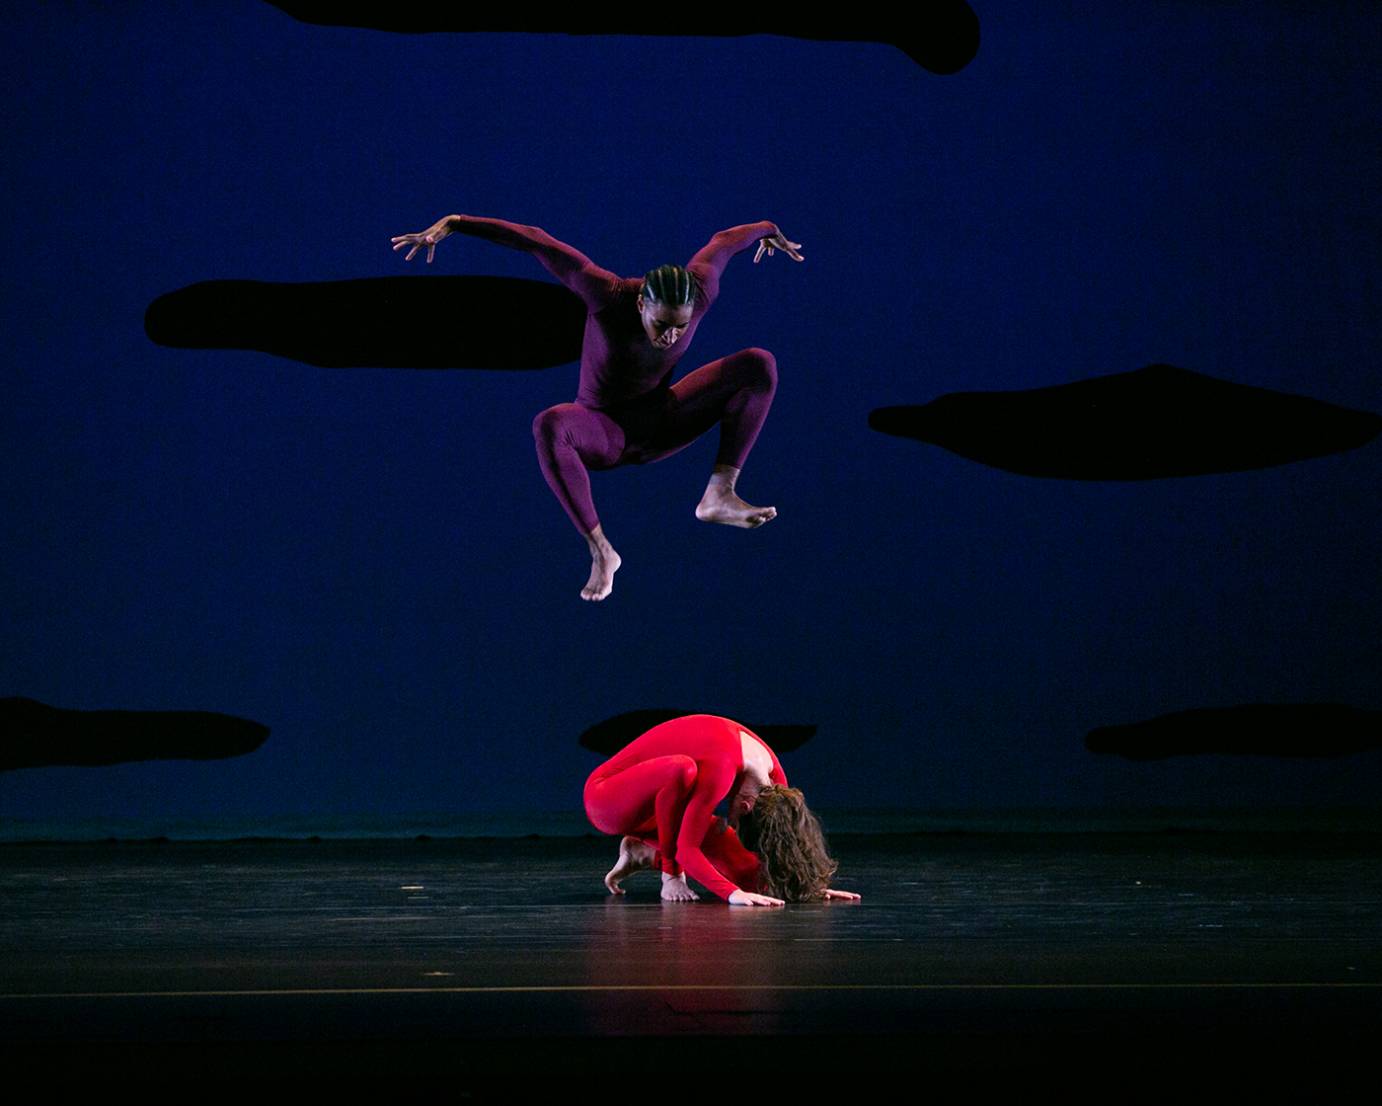 a Black man in a purple unitard jumps high above a woman in a red unitard crouched in a a ball like positon